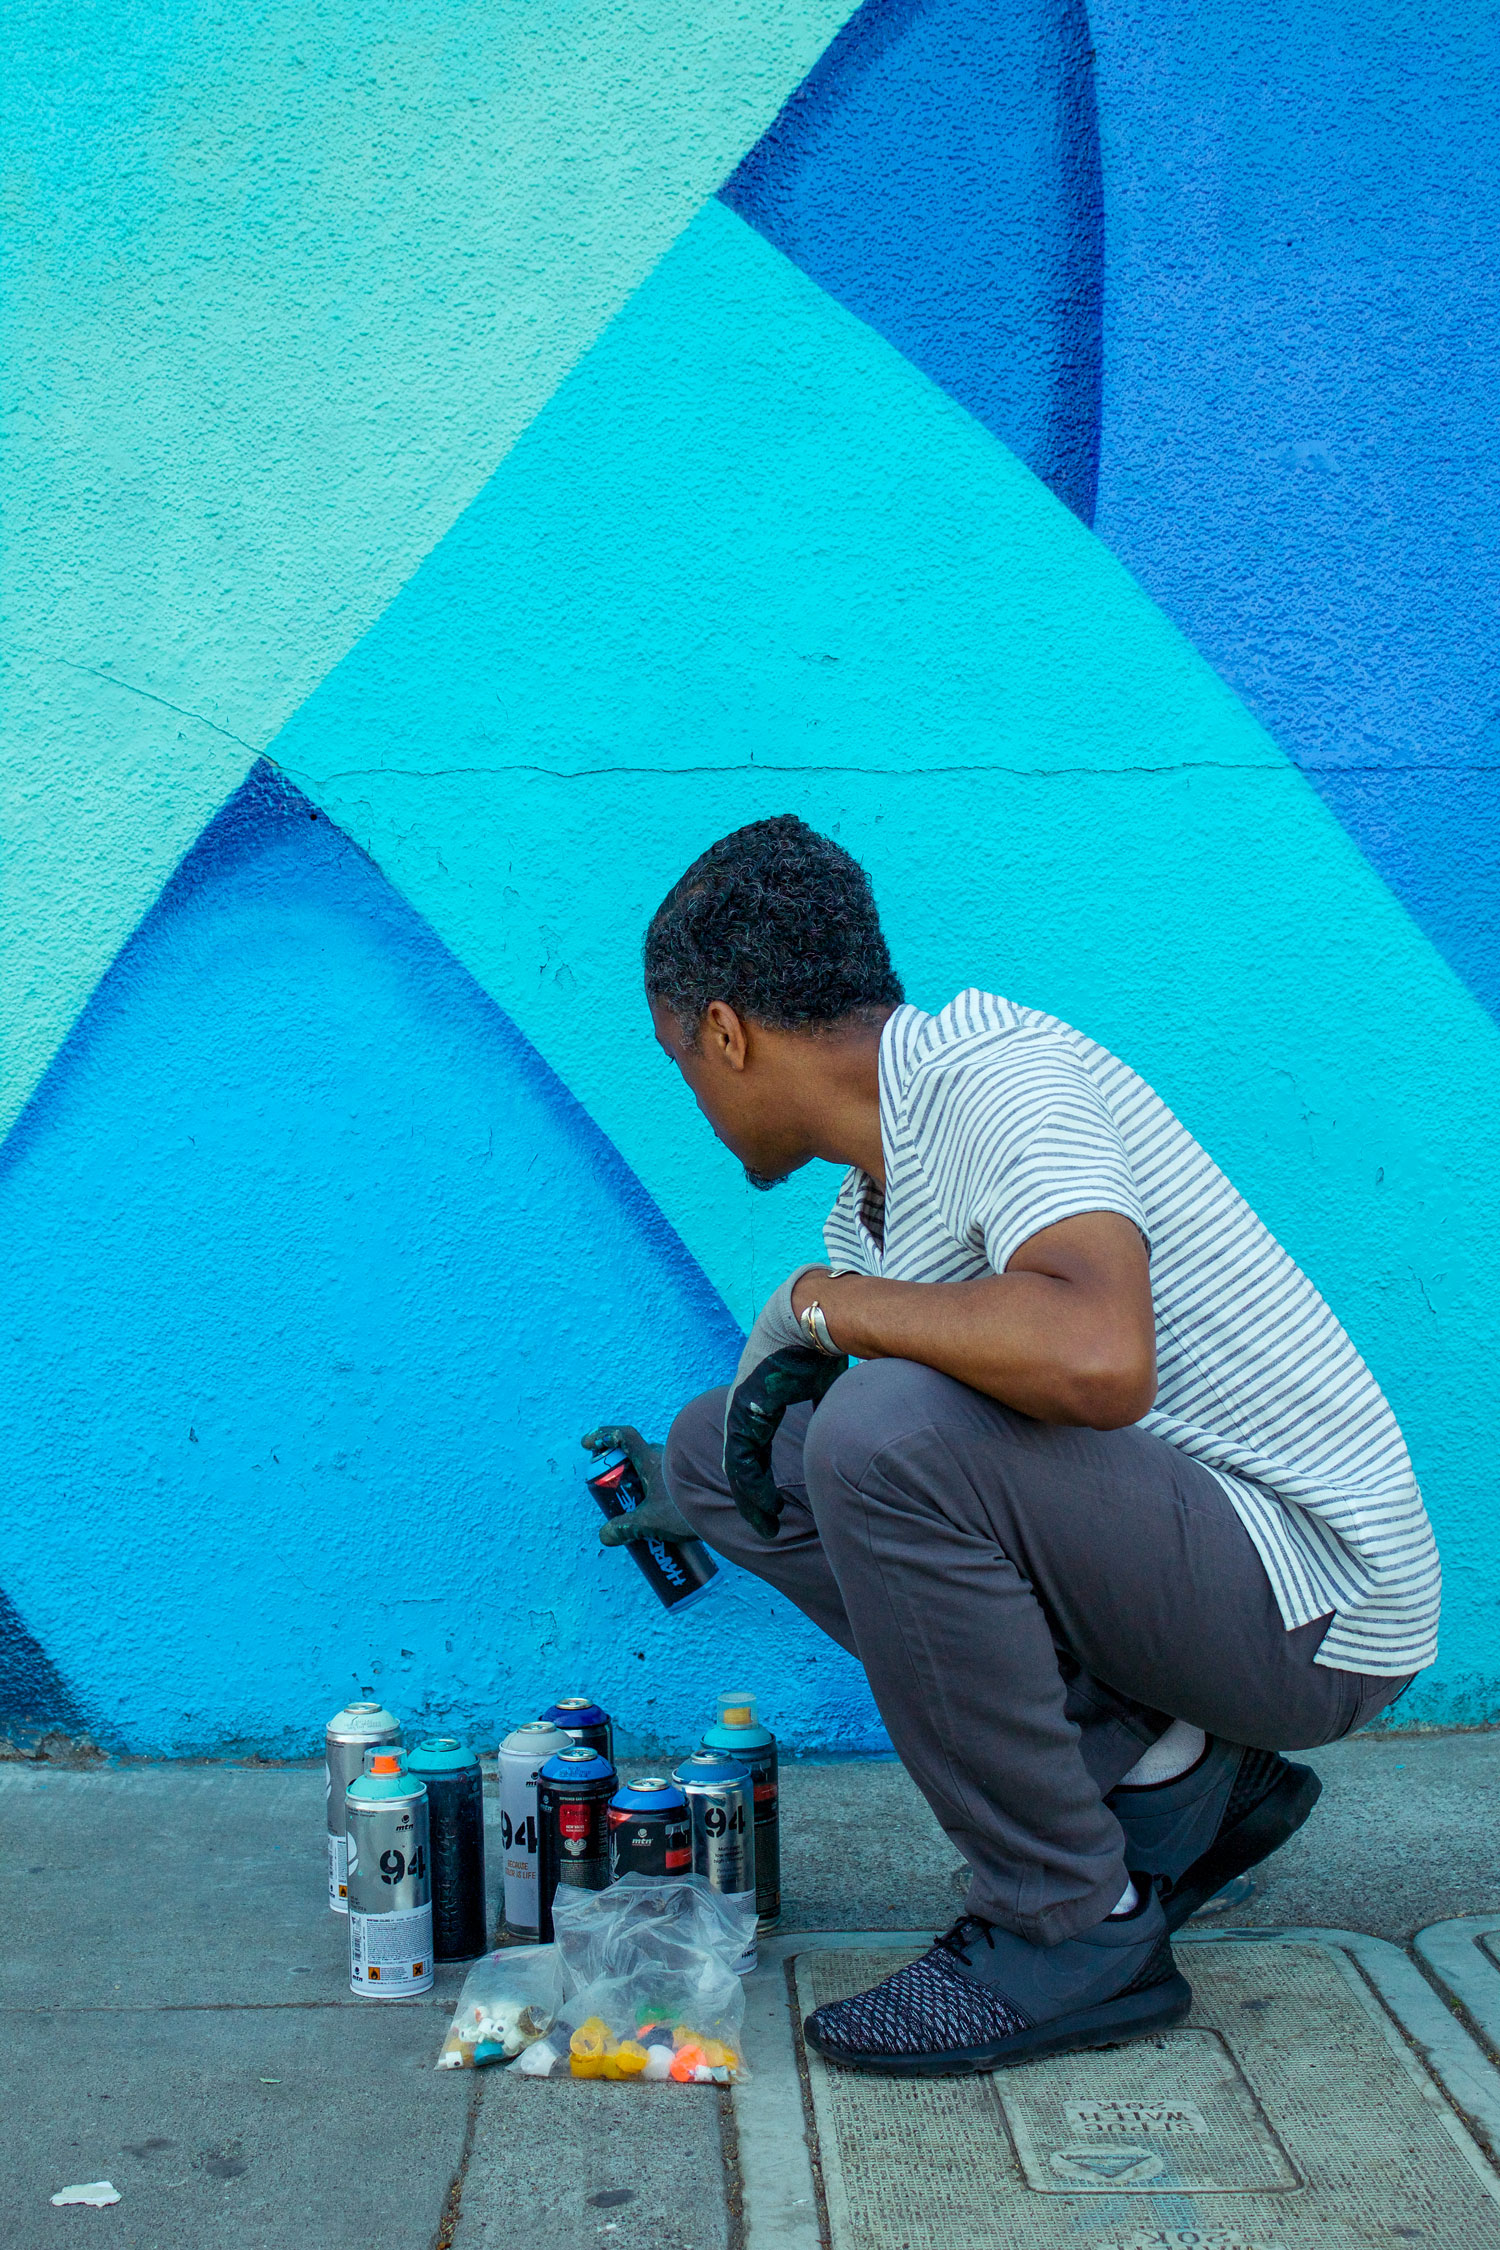 Apexer, San Francisco Street Artist for ONS Clothing